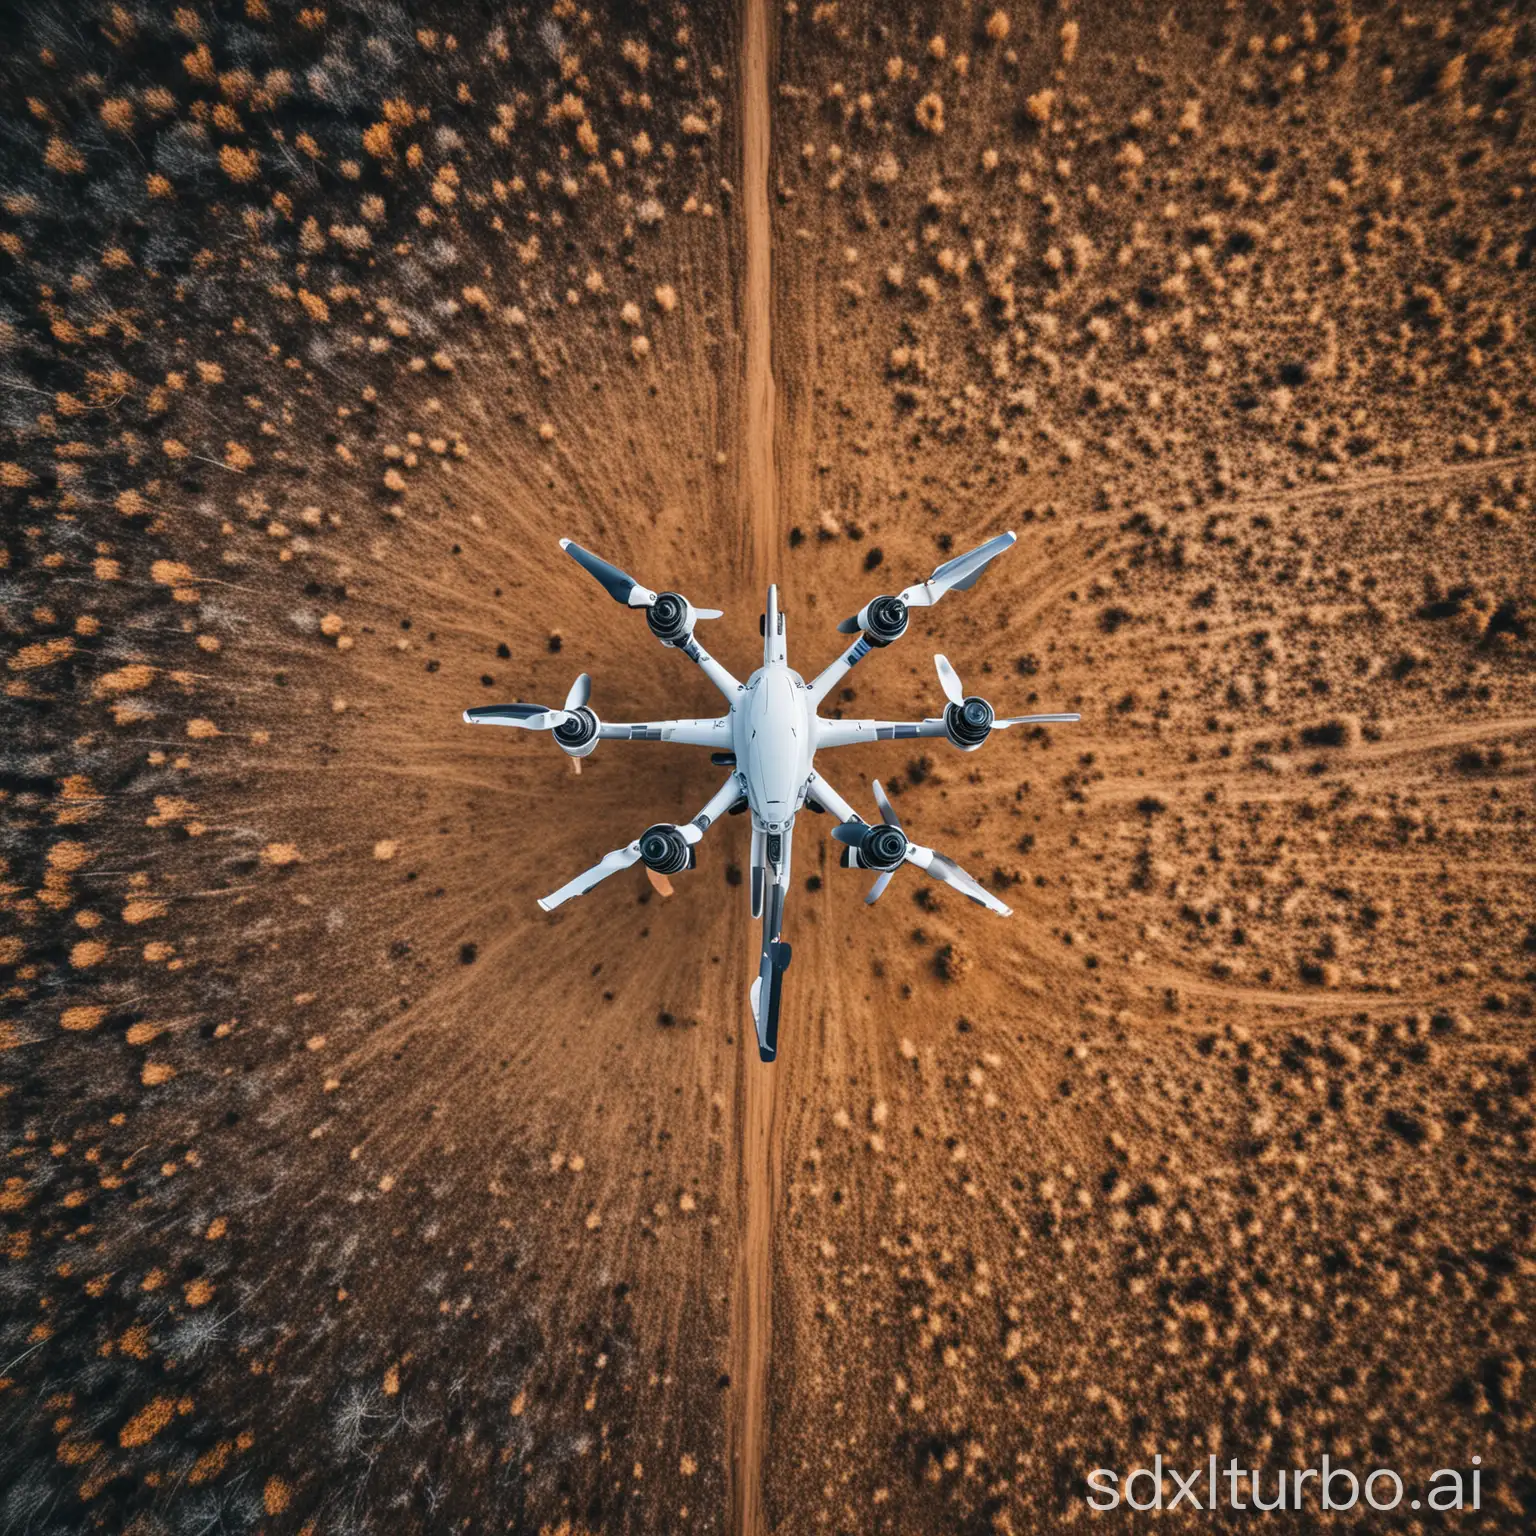 Aerial-Drone-Photography-Capturing-Urban-Landscapes-at-Sunset